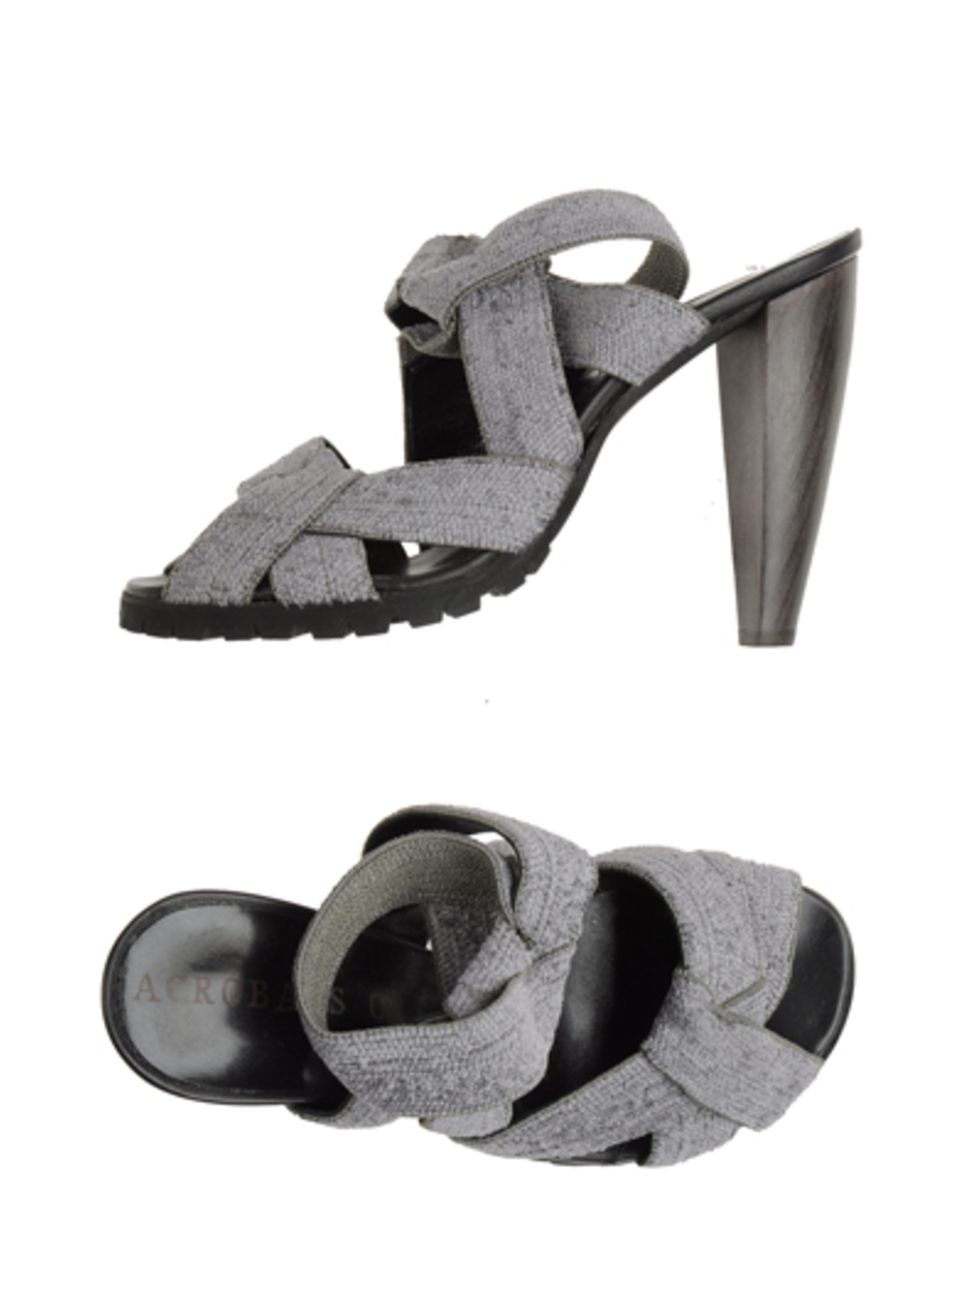 Grey, Sandal, Costume accessory, High heels, Synthetic rubber, Basic pump, 